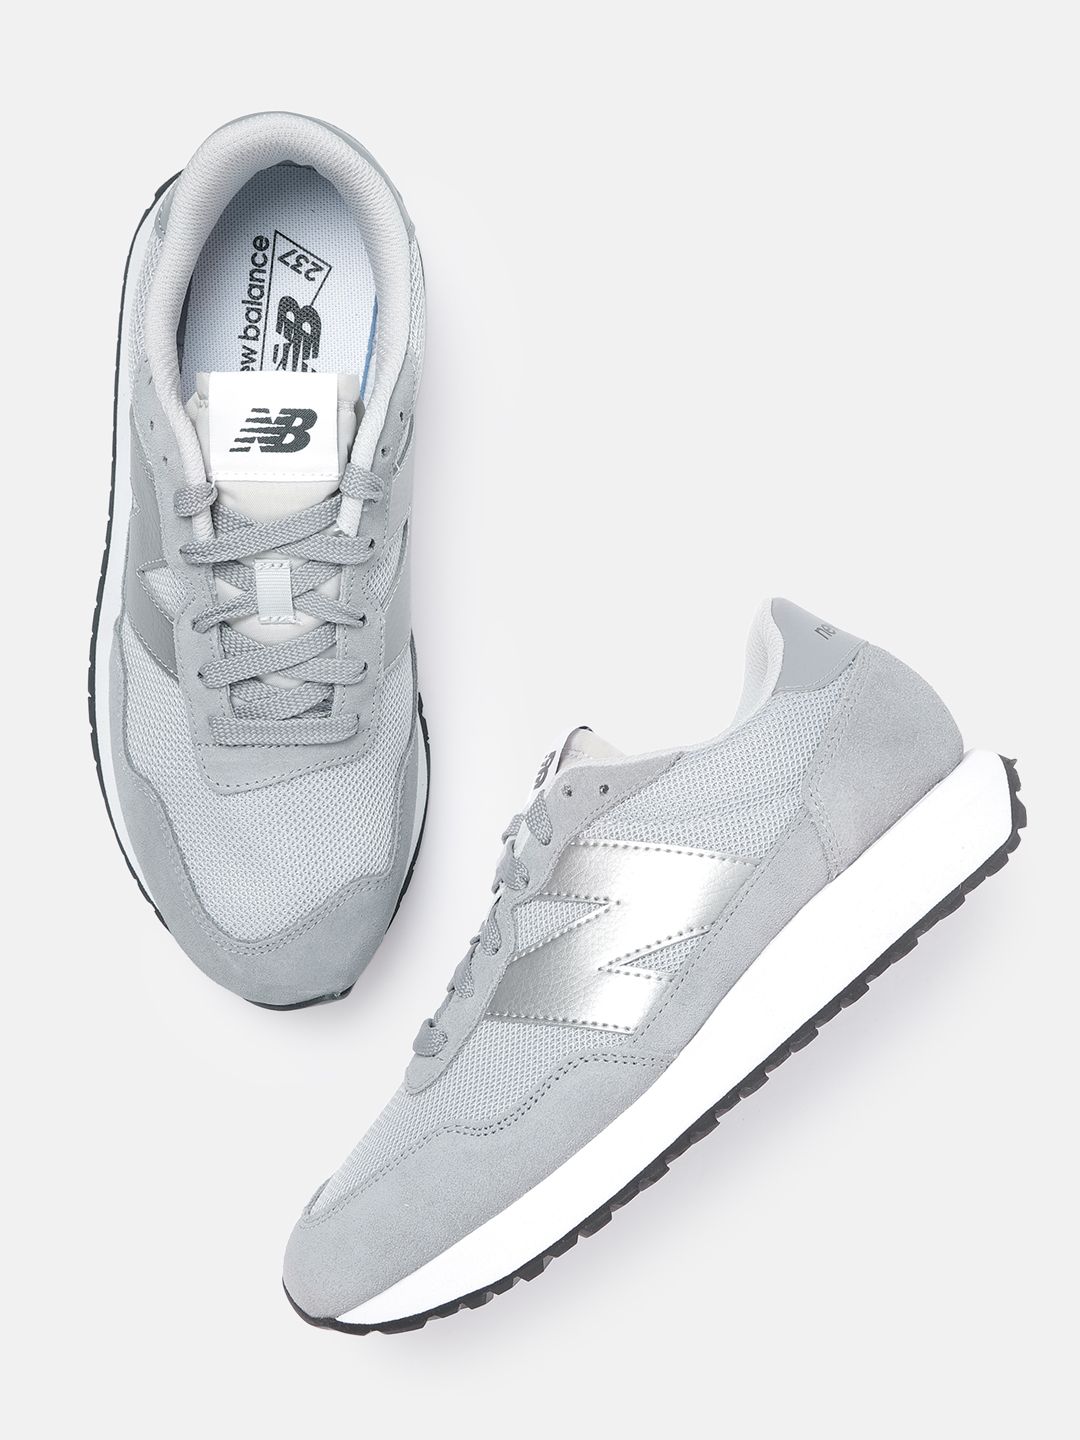 New Balance Women Grey Woven Design Suede Sneakers Price in India